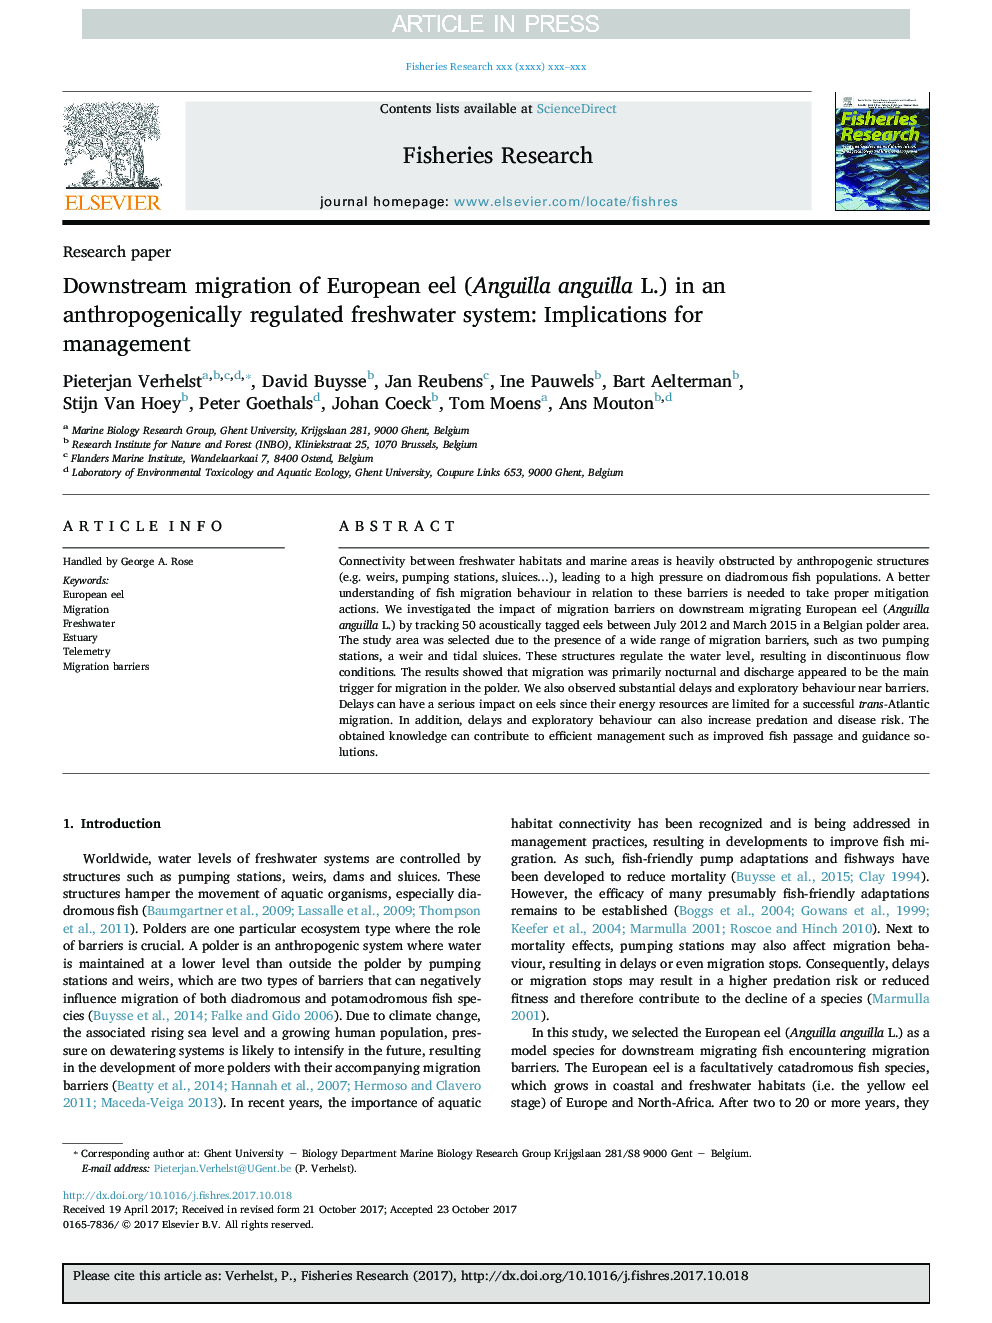 Downstream migration of European eel (Anguilla anguilla L.) in an anthropogenically regulated freshwater system: Implications for management